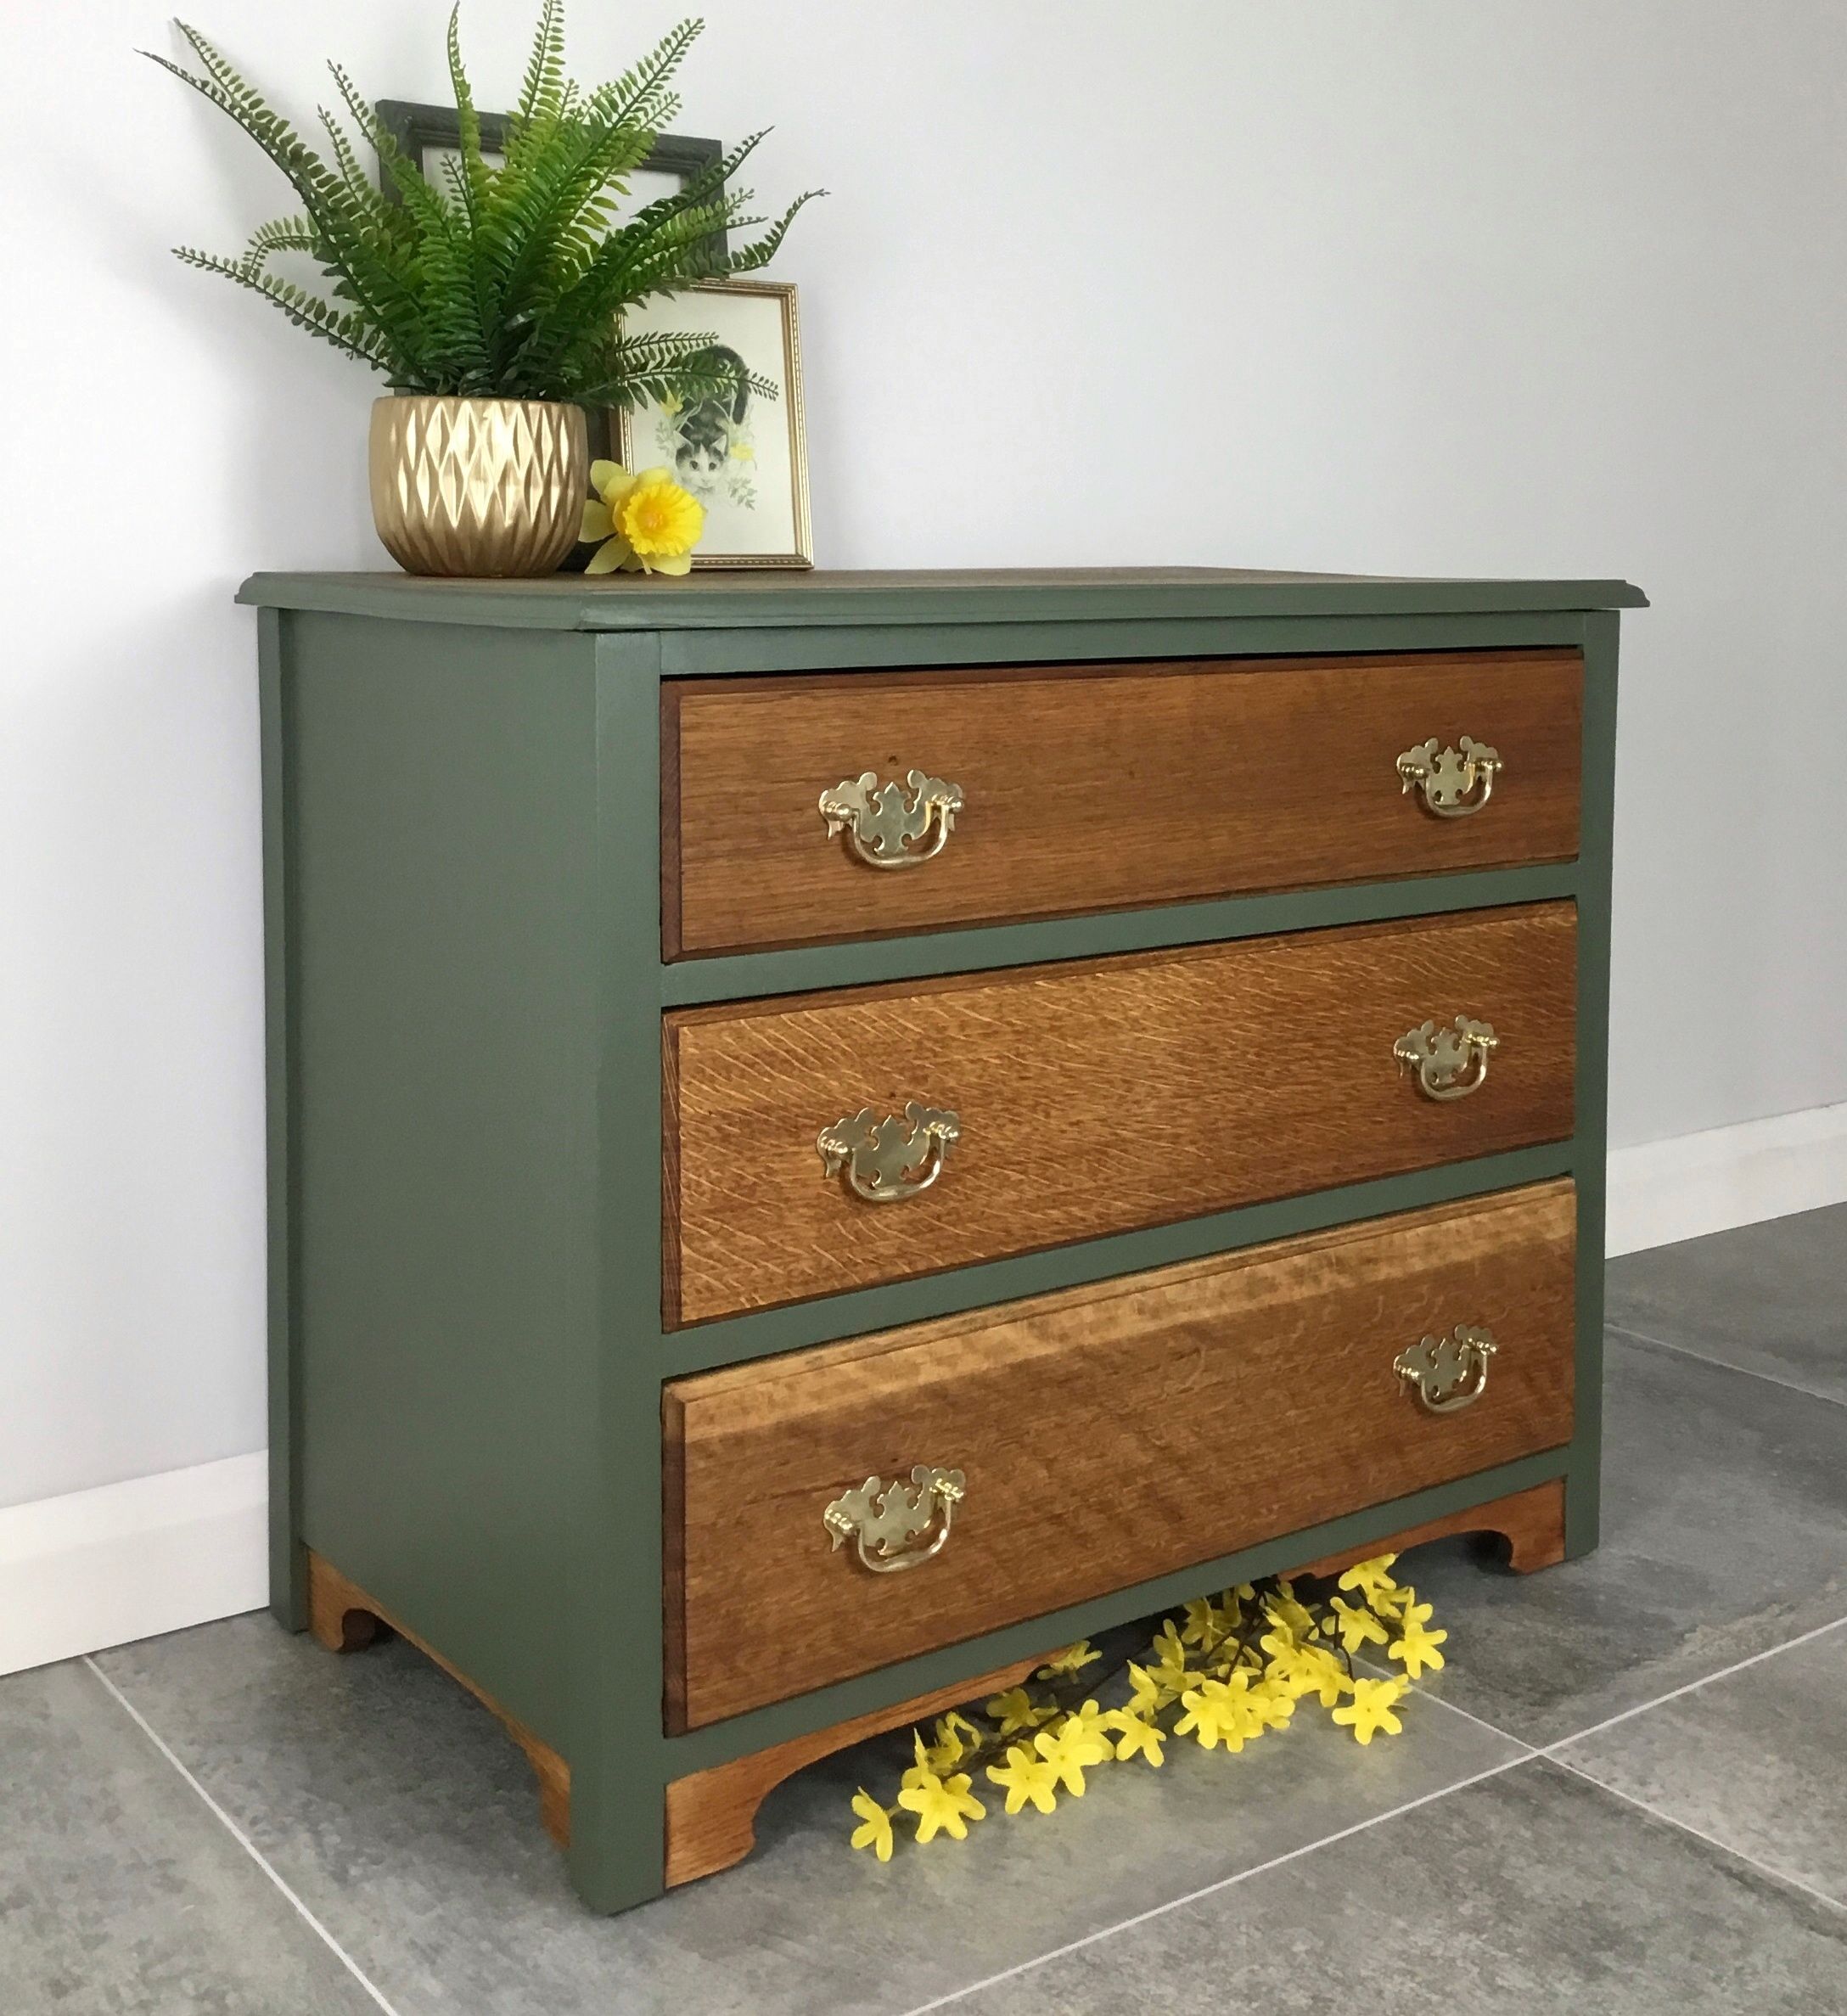 Choose the best chest of drawers